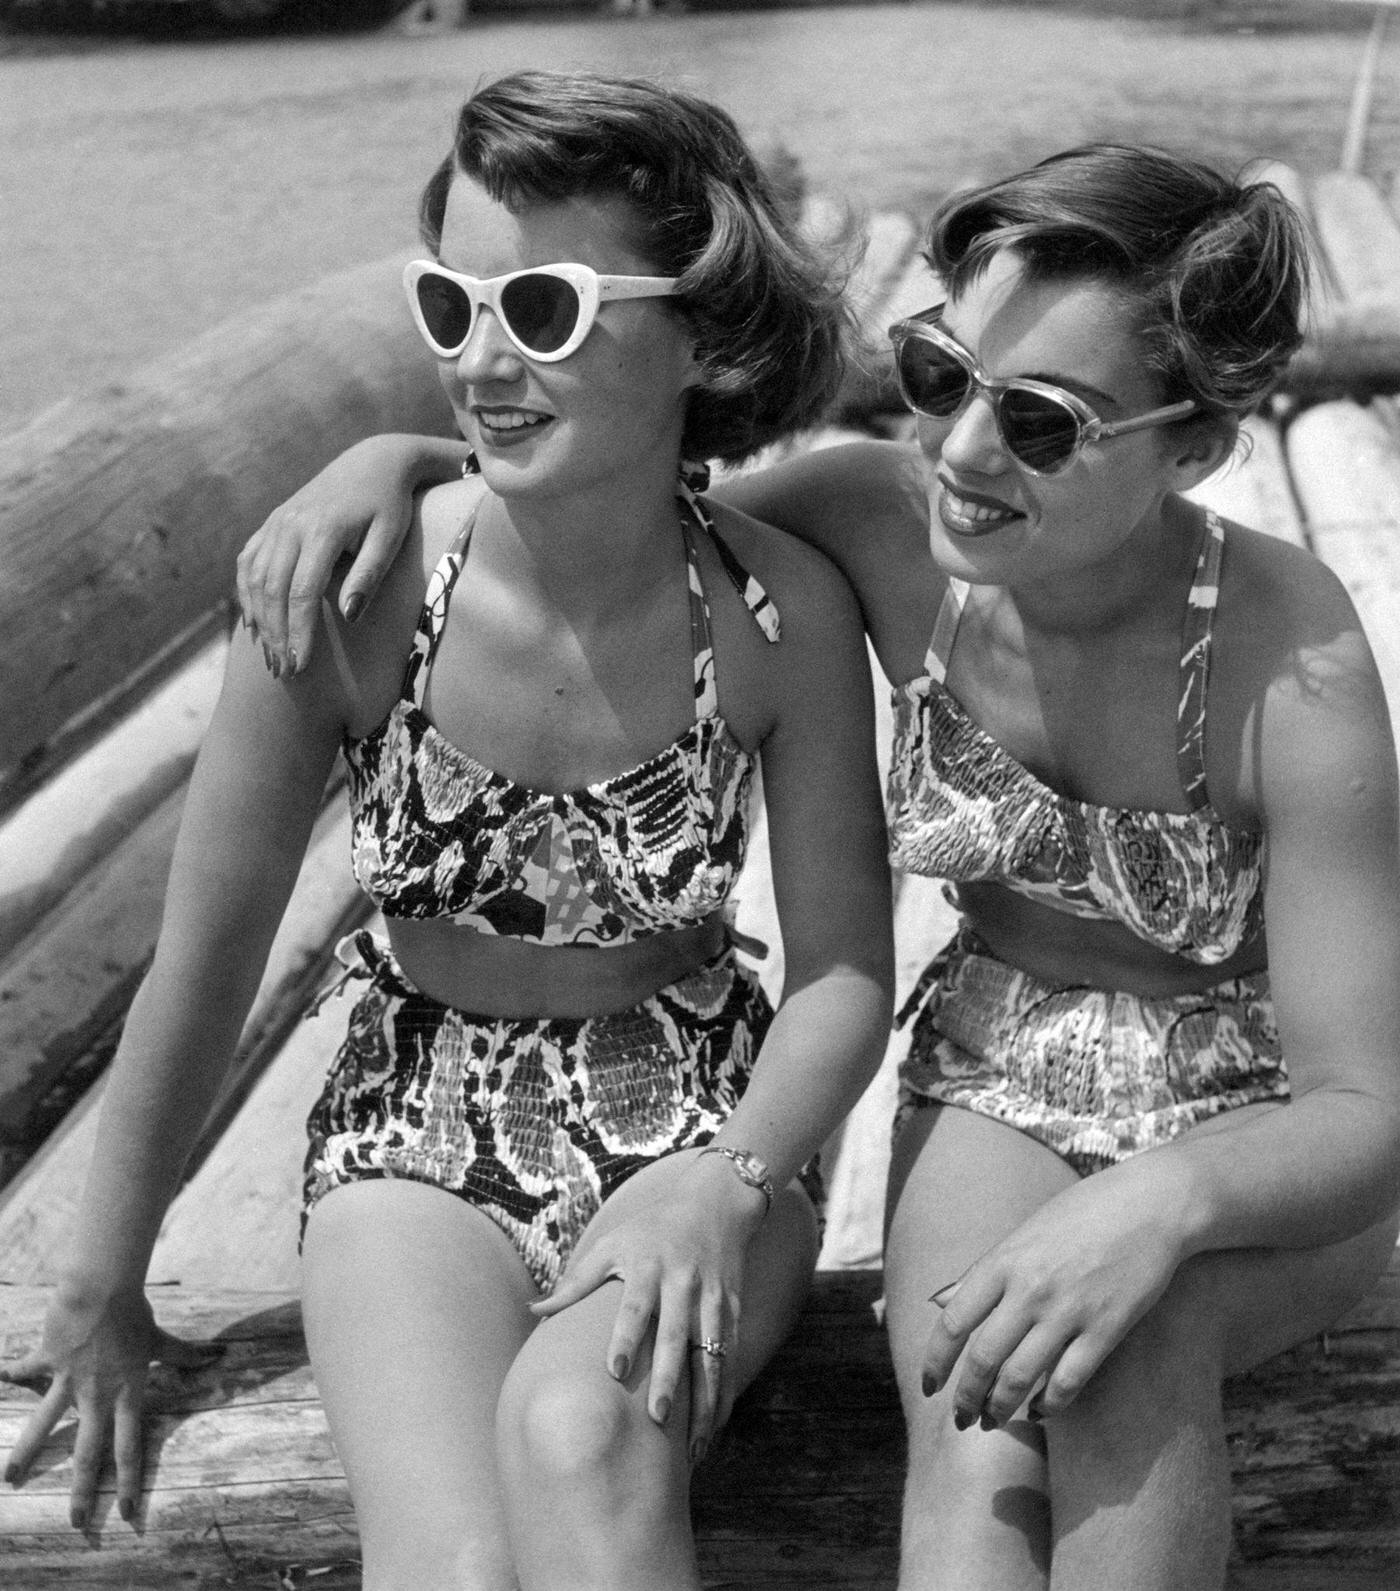 Two girls in sunglasses and bikini hugging each other, 1950s.